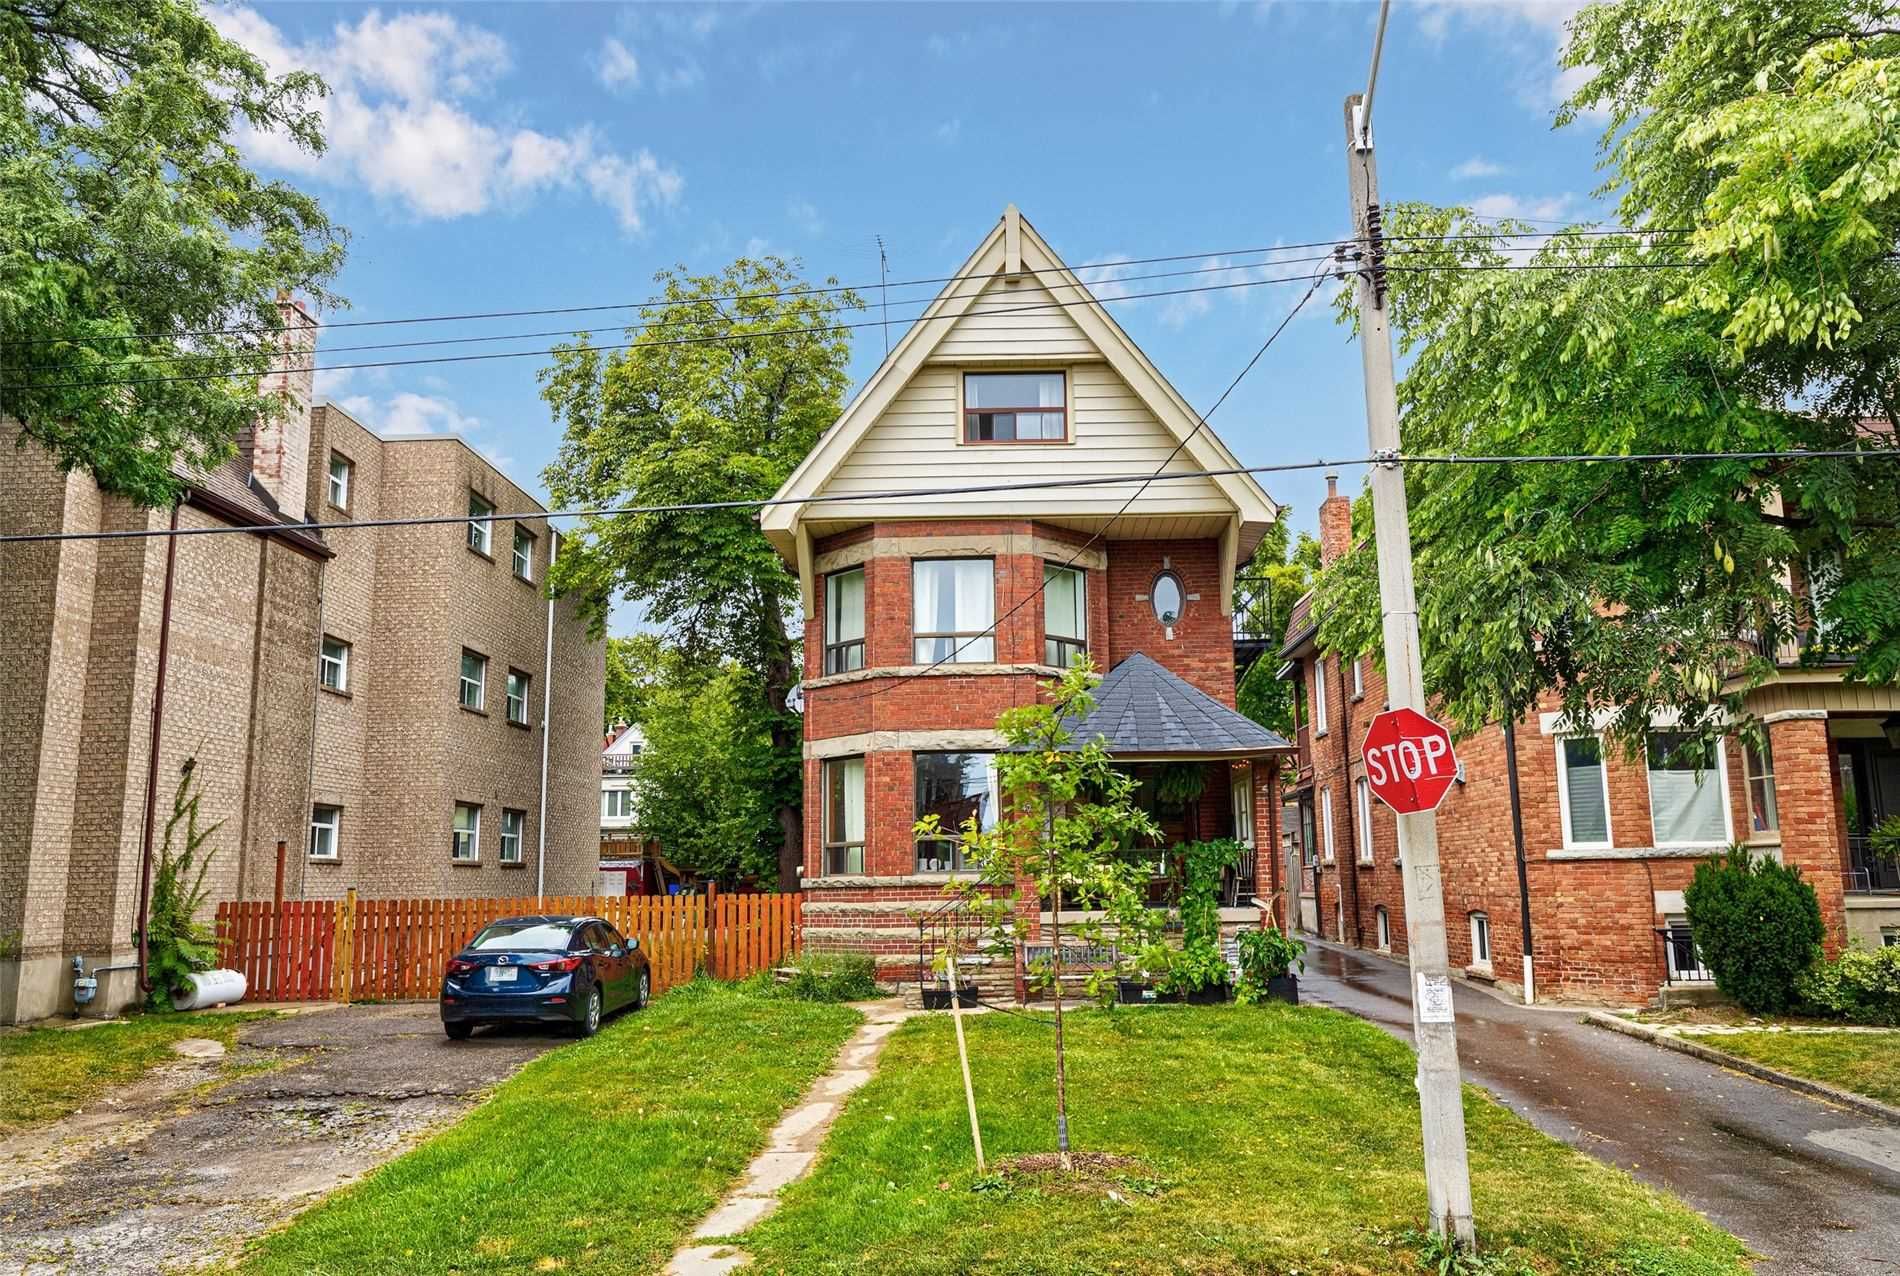 I have sold a property at 3 40 Harvard AVE in Toronto
